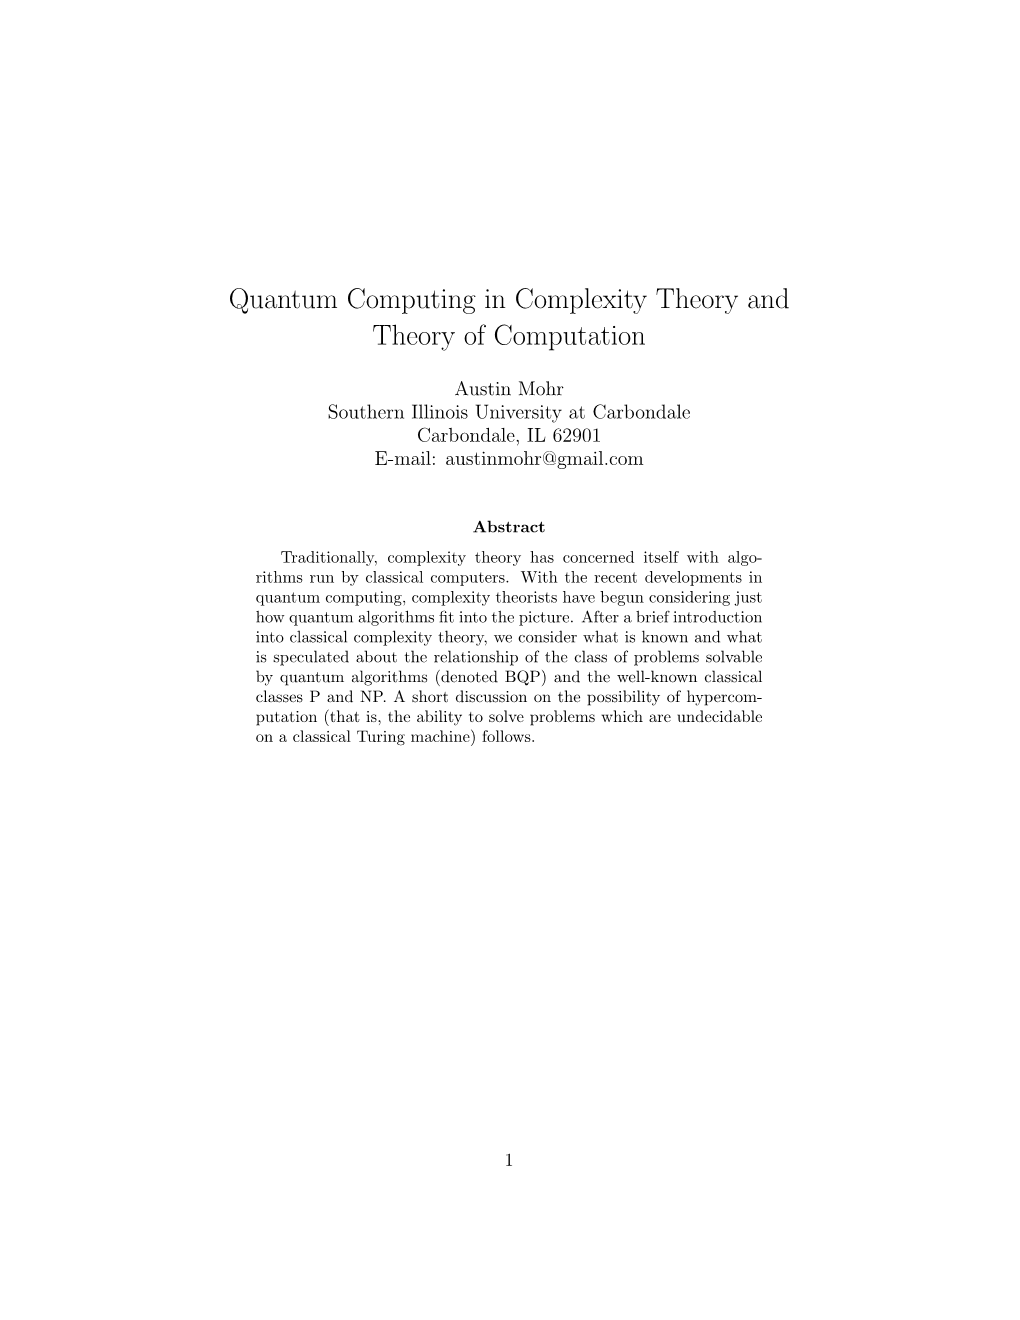 Quantum Computing in Complexity Theory and Theory of Computation